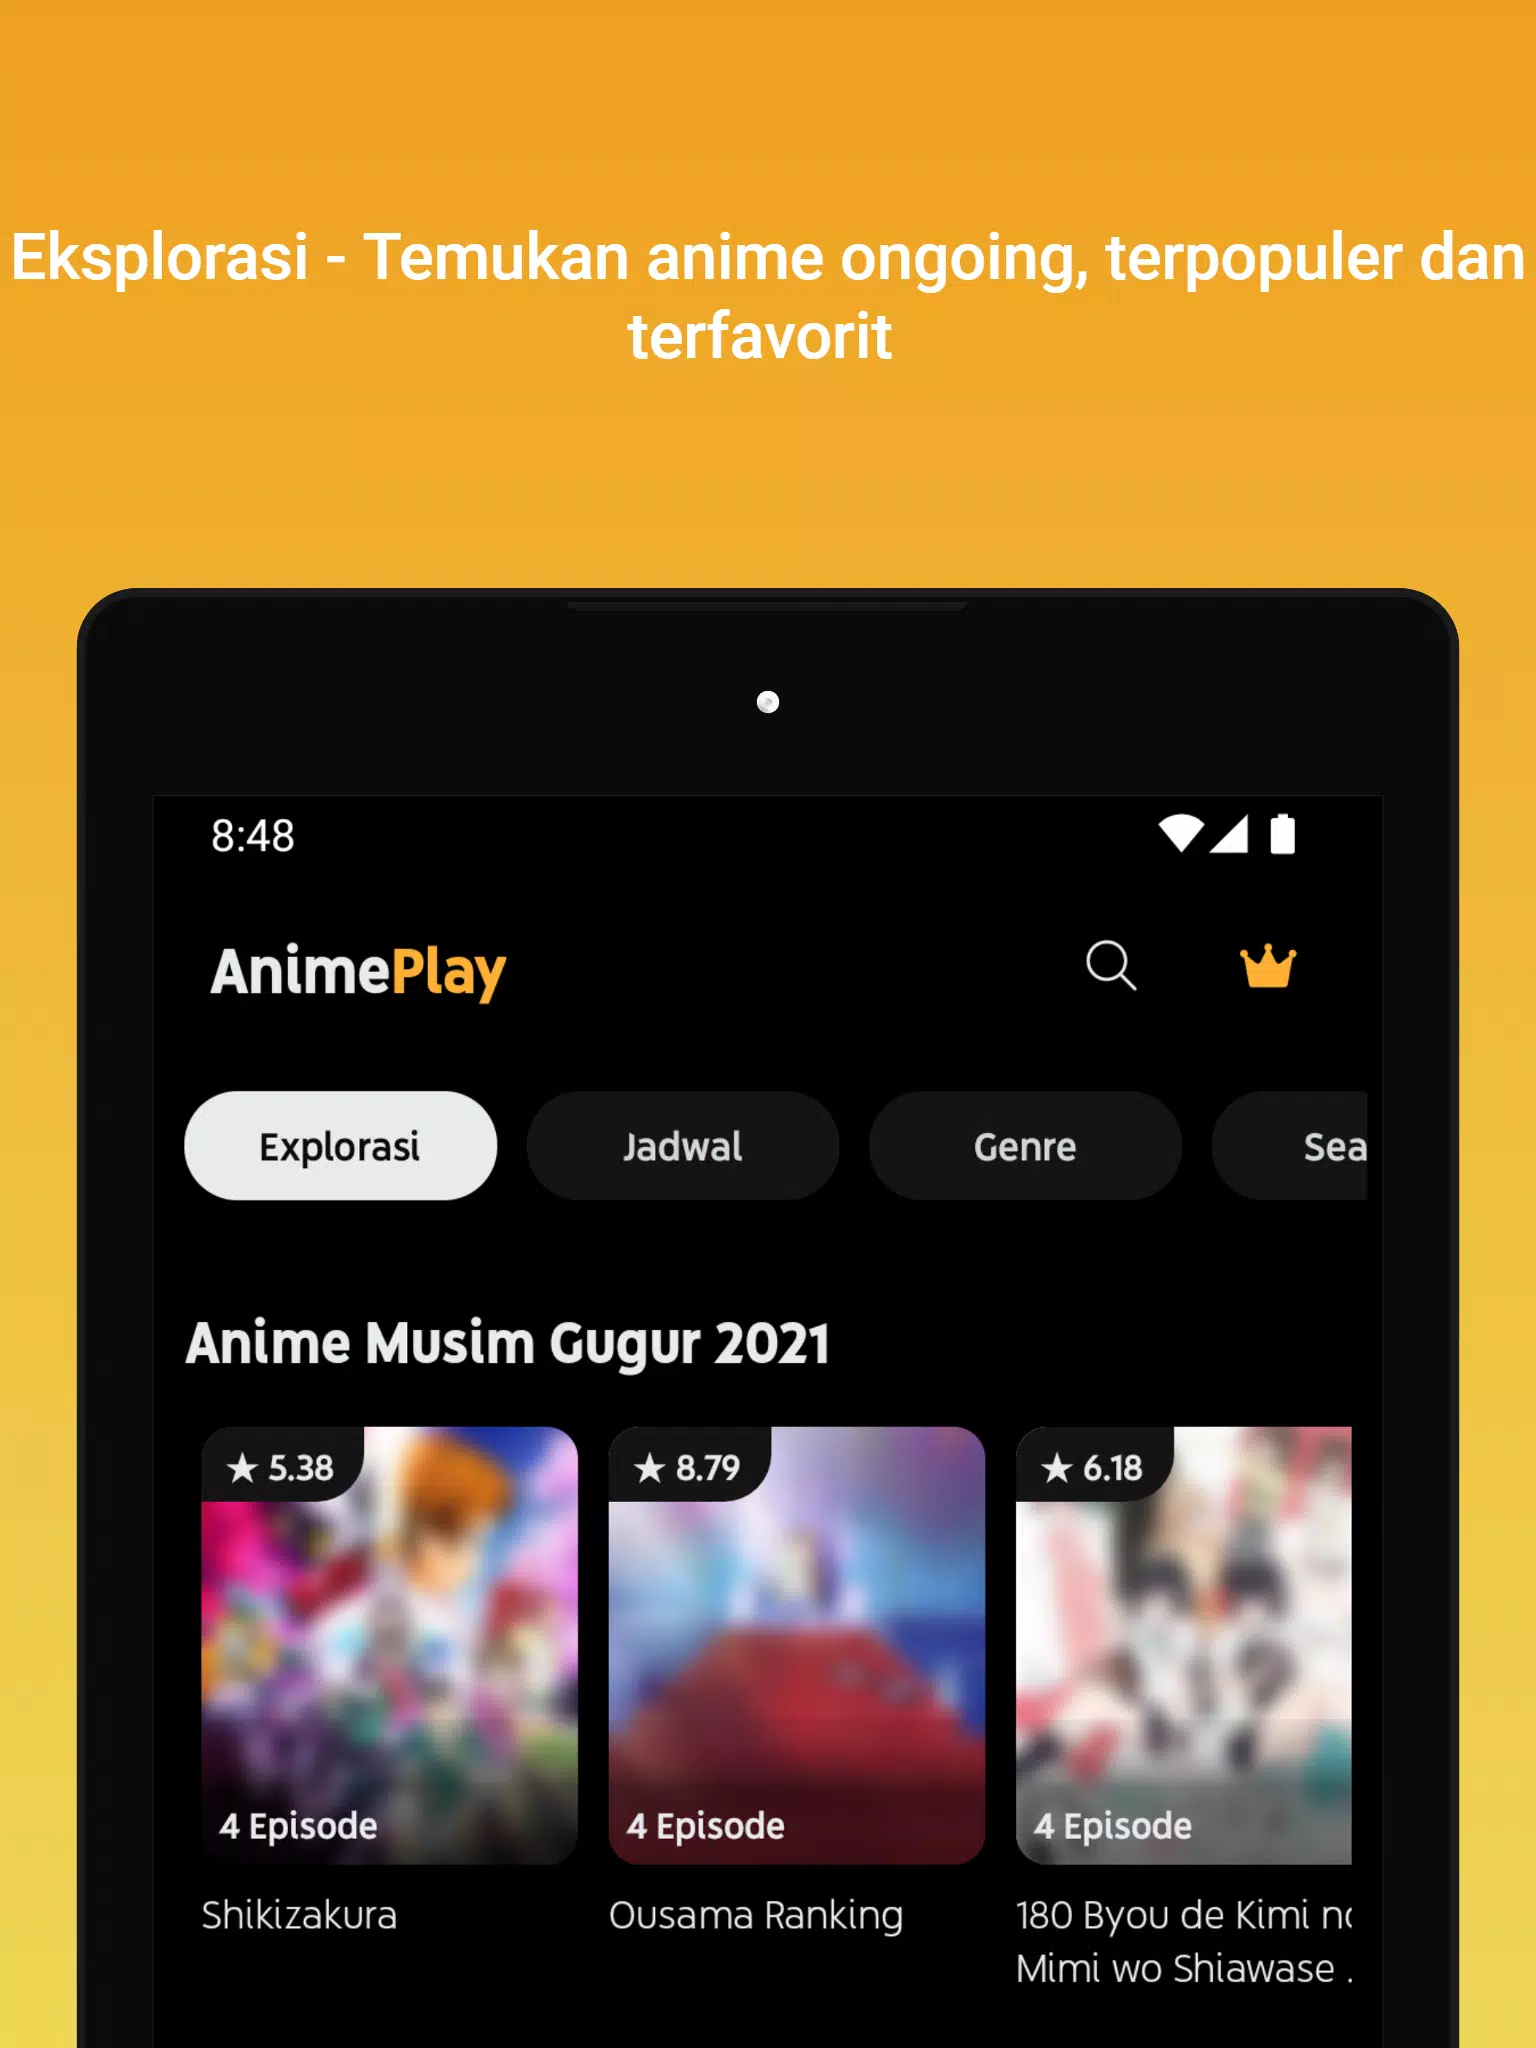 About: Anime TV - Watch Anime Online (Google Play version